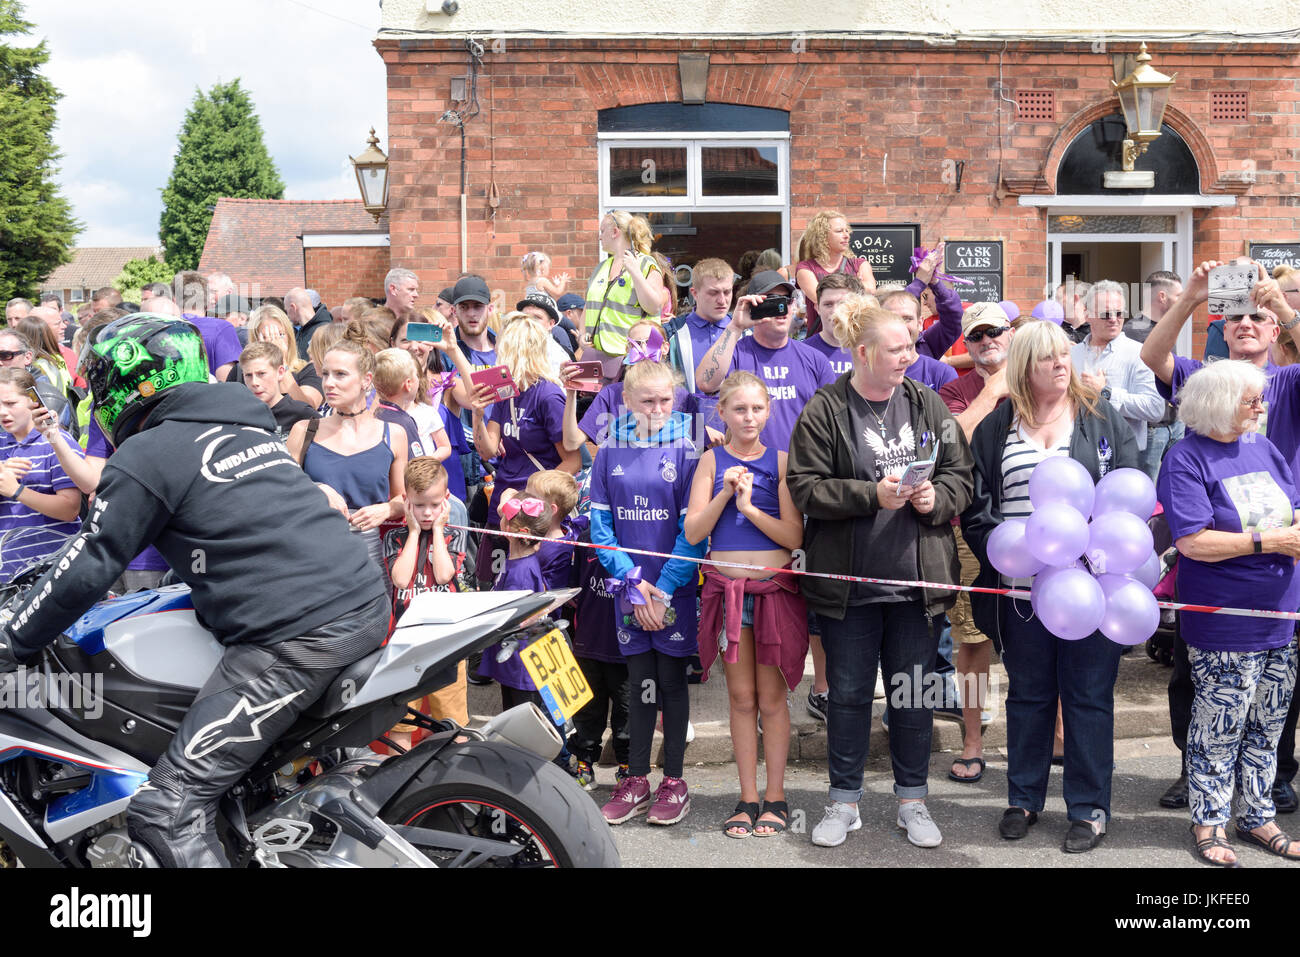 Beeston, Nottinghamshire, UK. 23rd July 2017. Nottinghamshire bikers’ group, Nottz Bikerz held a charity motorcycle run for Owen Jenkins.Owen drowned in the river Trent trying to save a young girl who was in trouble in the water.Thousands of motorcyclist turn up along with members of the public and Owens family members. Credit: Ian Francis/Alamy Live News Stock Photo